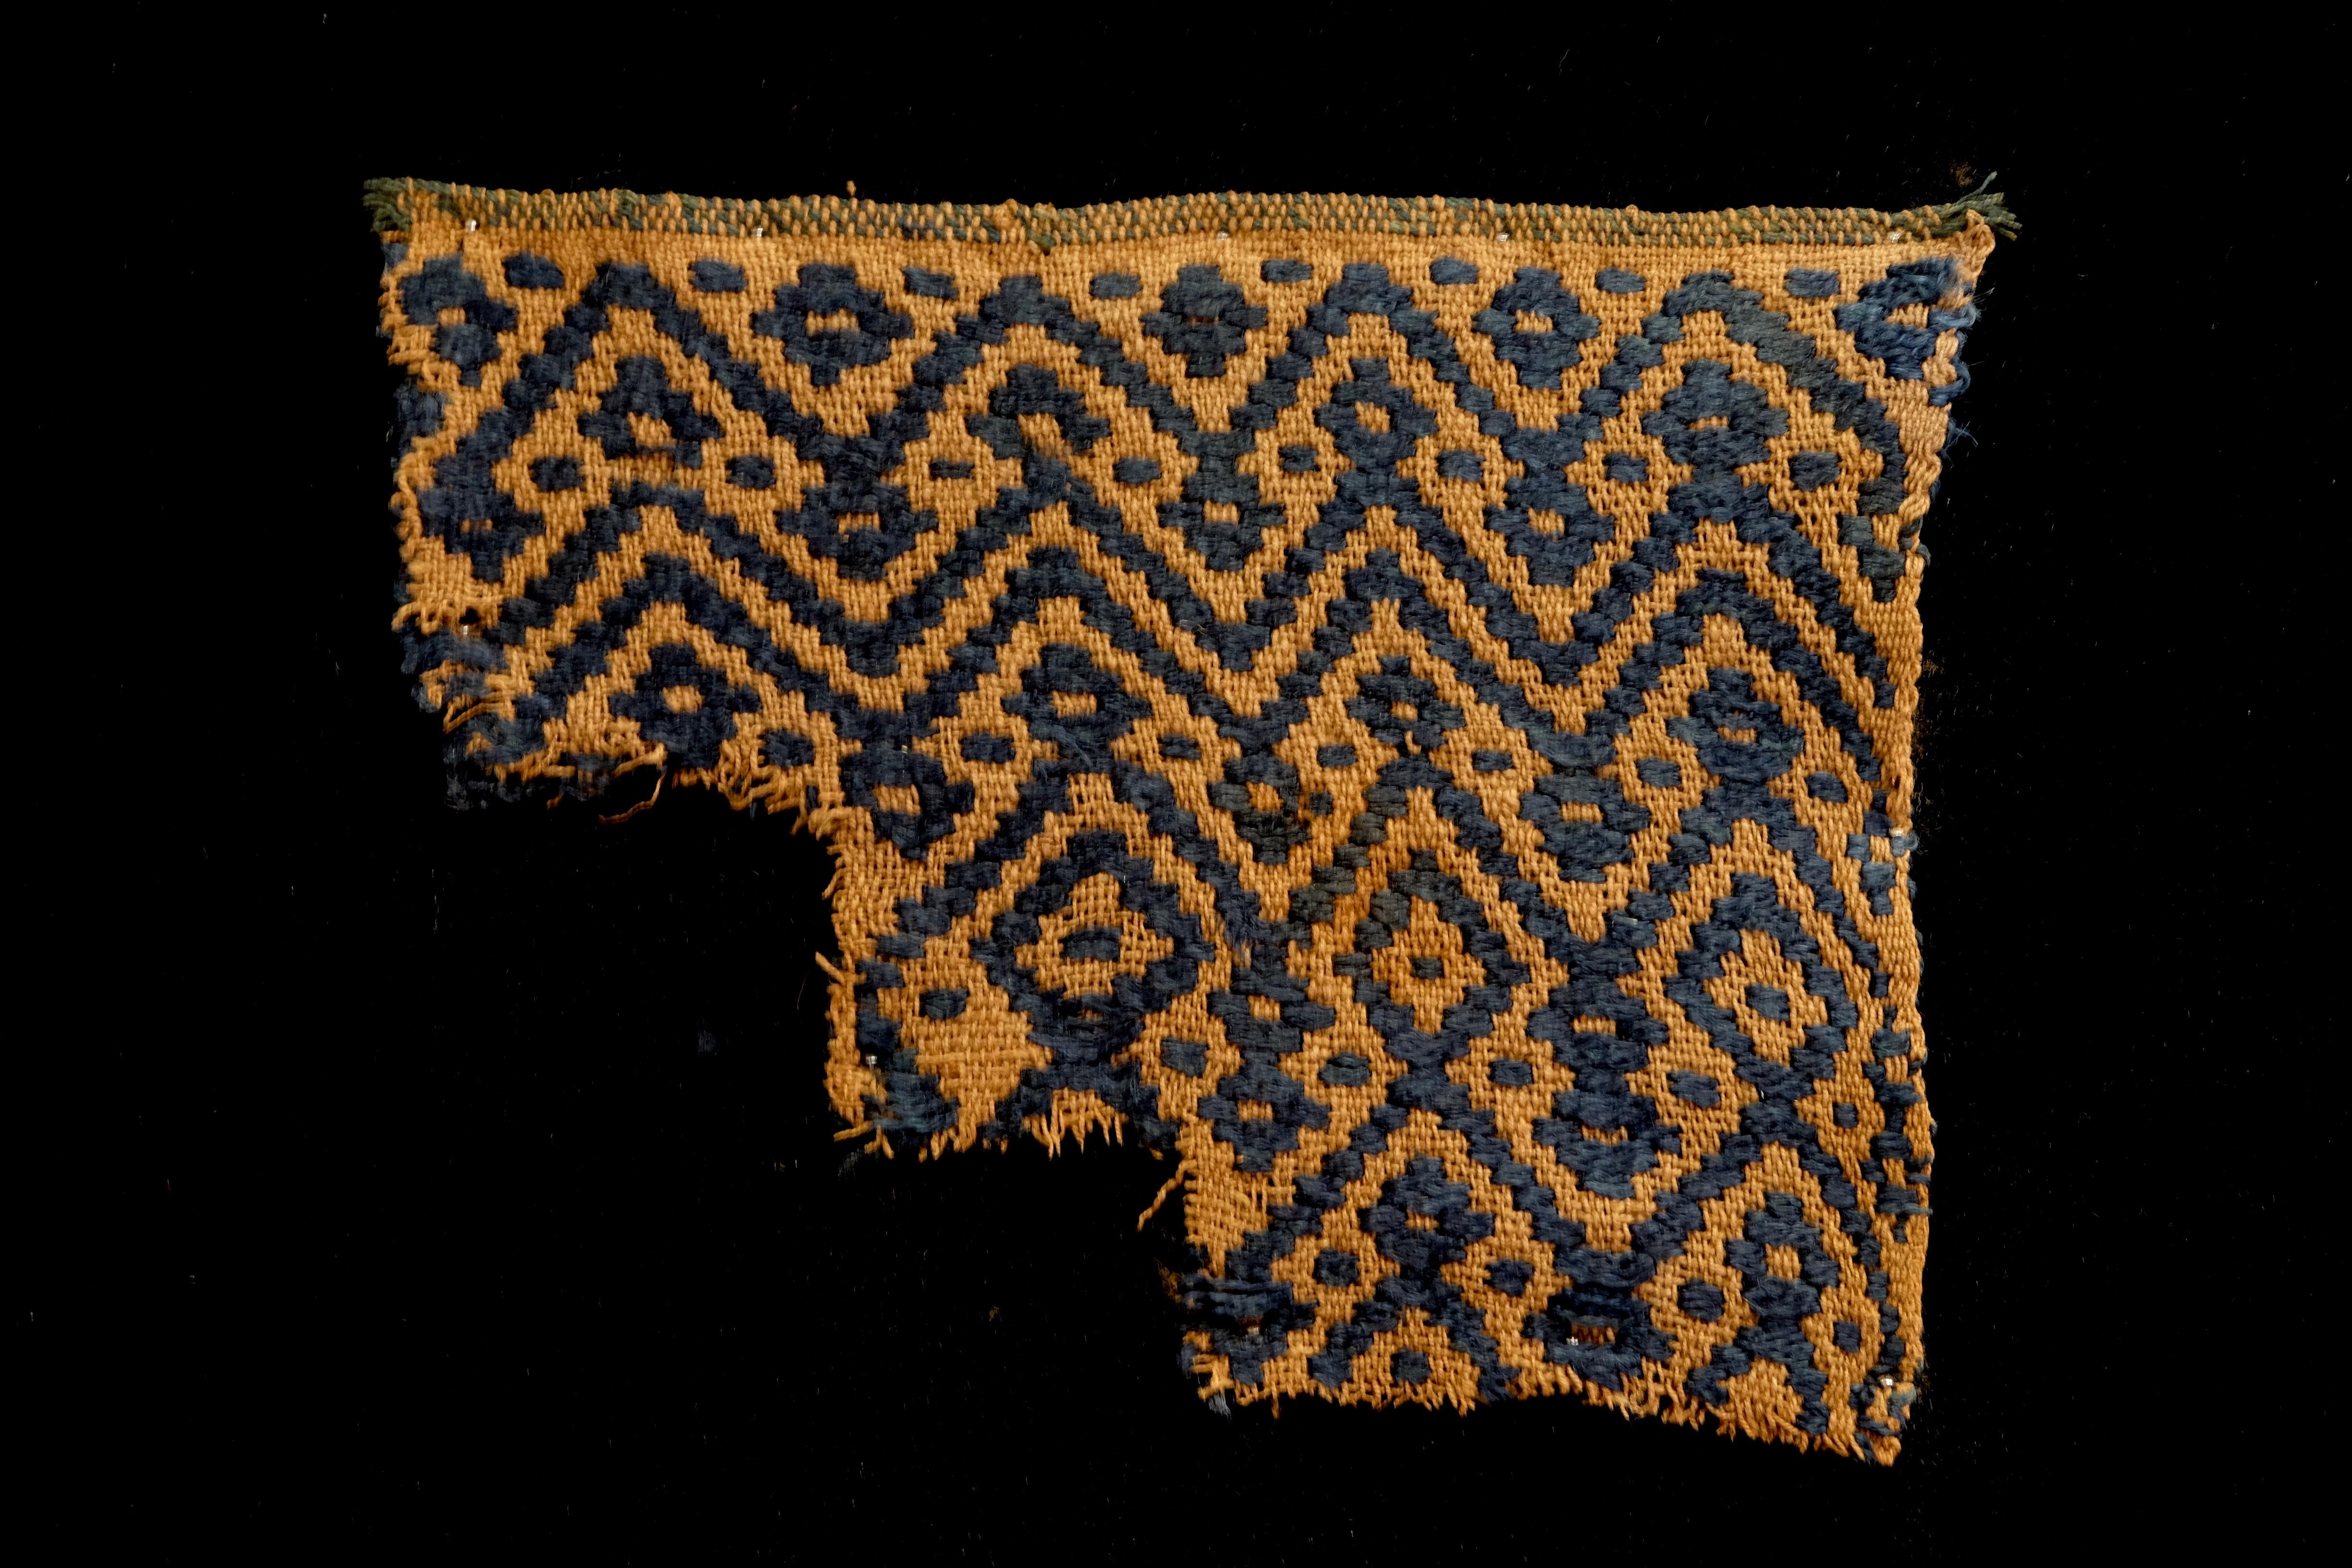 Golden brown Pre-Columbian textile fragment with dark blue geometric patterns. This piece is framed in a black shadowbox.

It is a wonder to behold antiquities such as a Pre-Columbian textiles, an authentic piece of art that has been preserved for